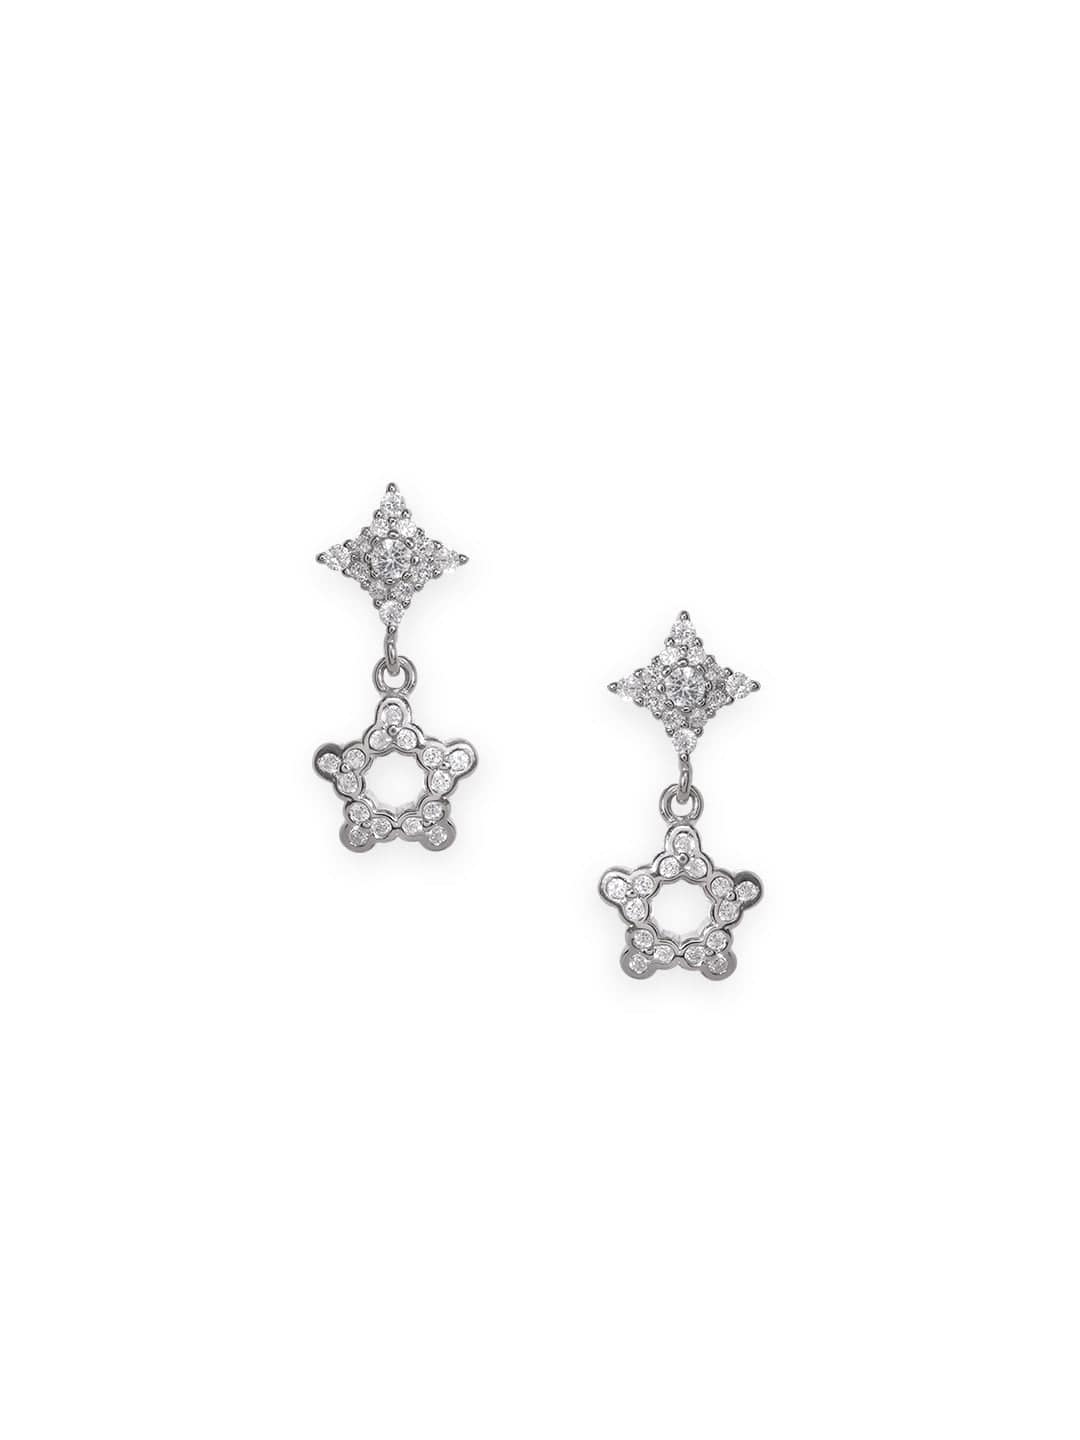 Rubans Silver Drop Earrings With Dazzling Ad Accent Earrings